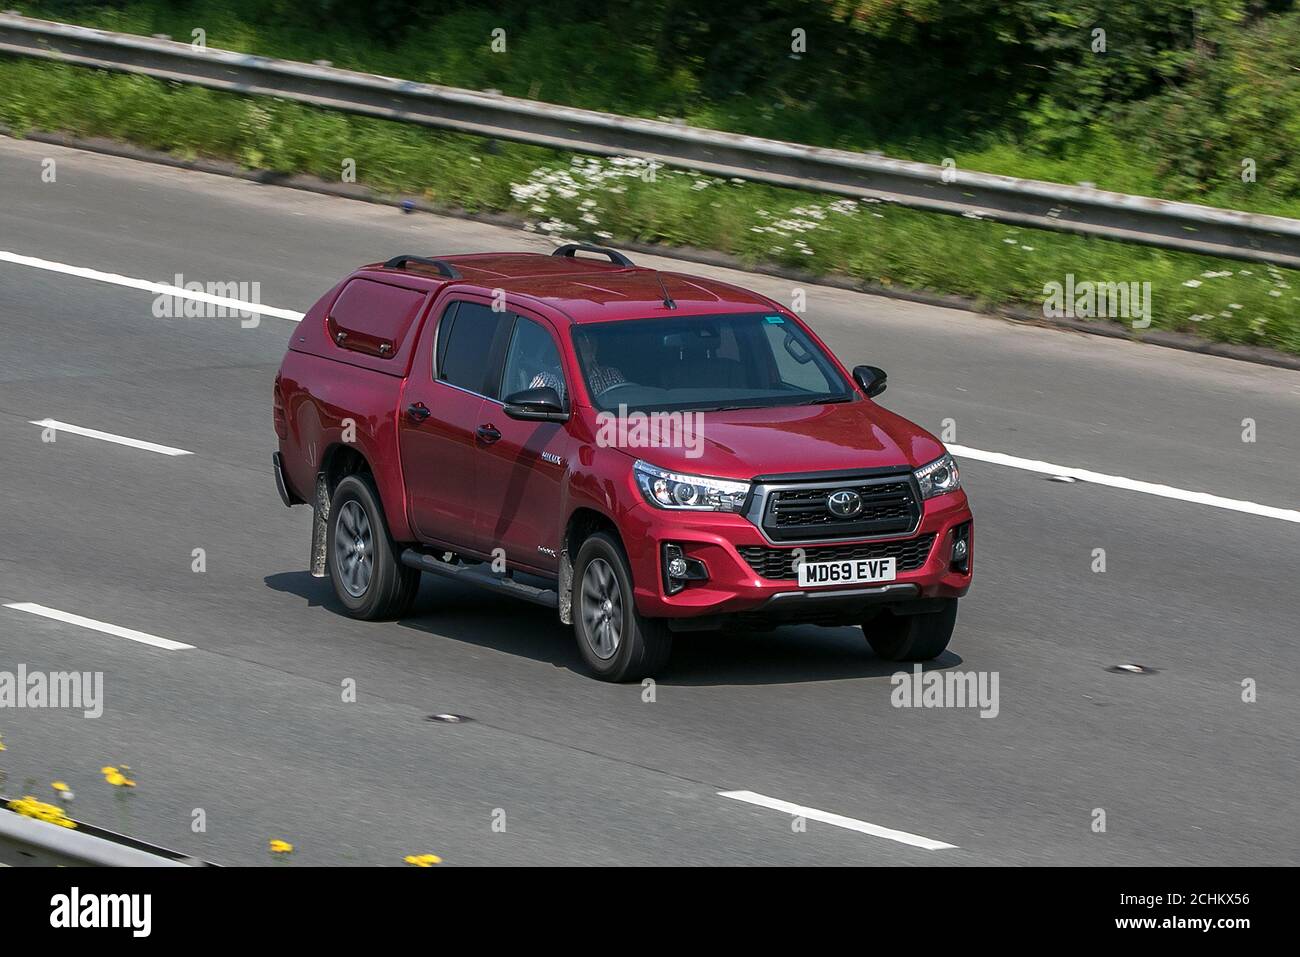 2020 Toyota Hilux Invincible X D-4D4wd Red LCV Double Cab Pick Up Diesel driving on the M6 motorway near Preston in Lancashire, UK. Stock Photo